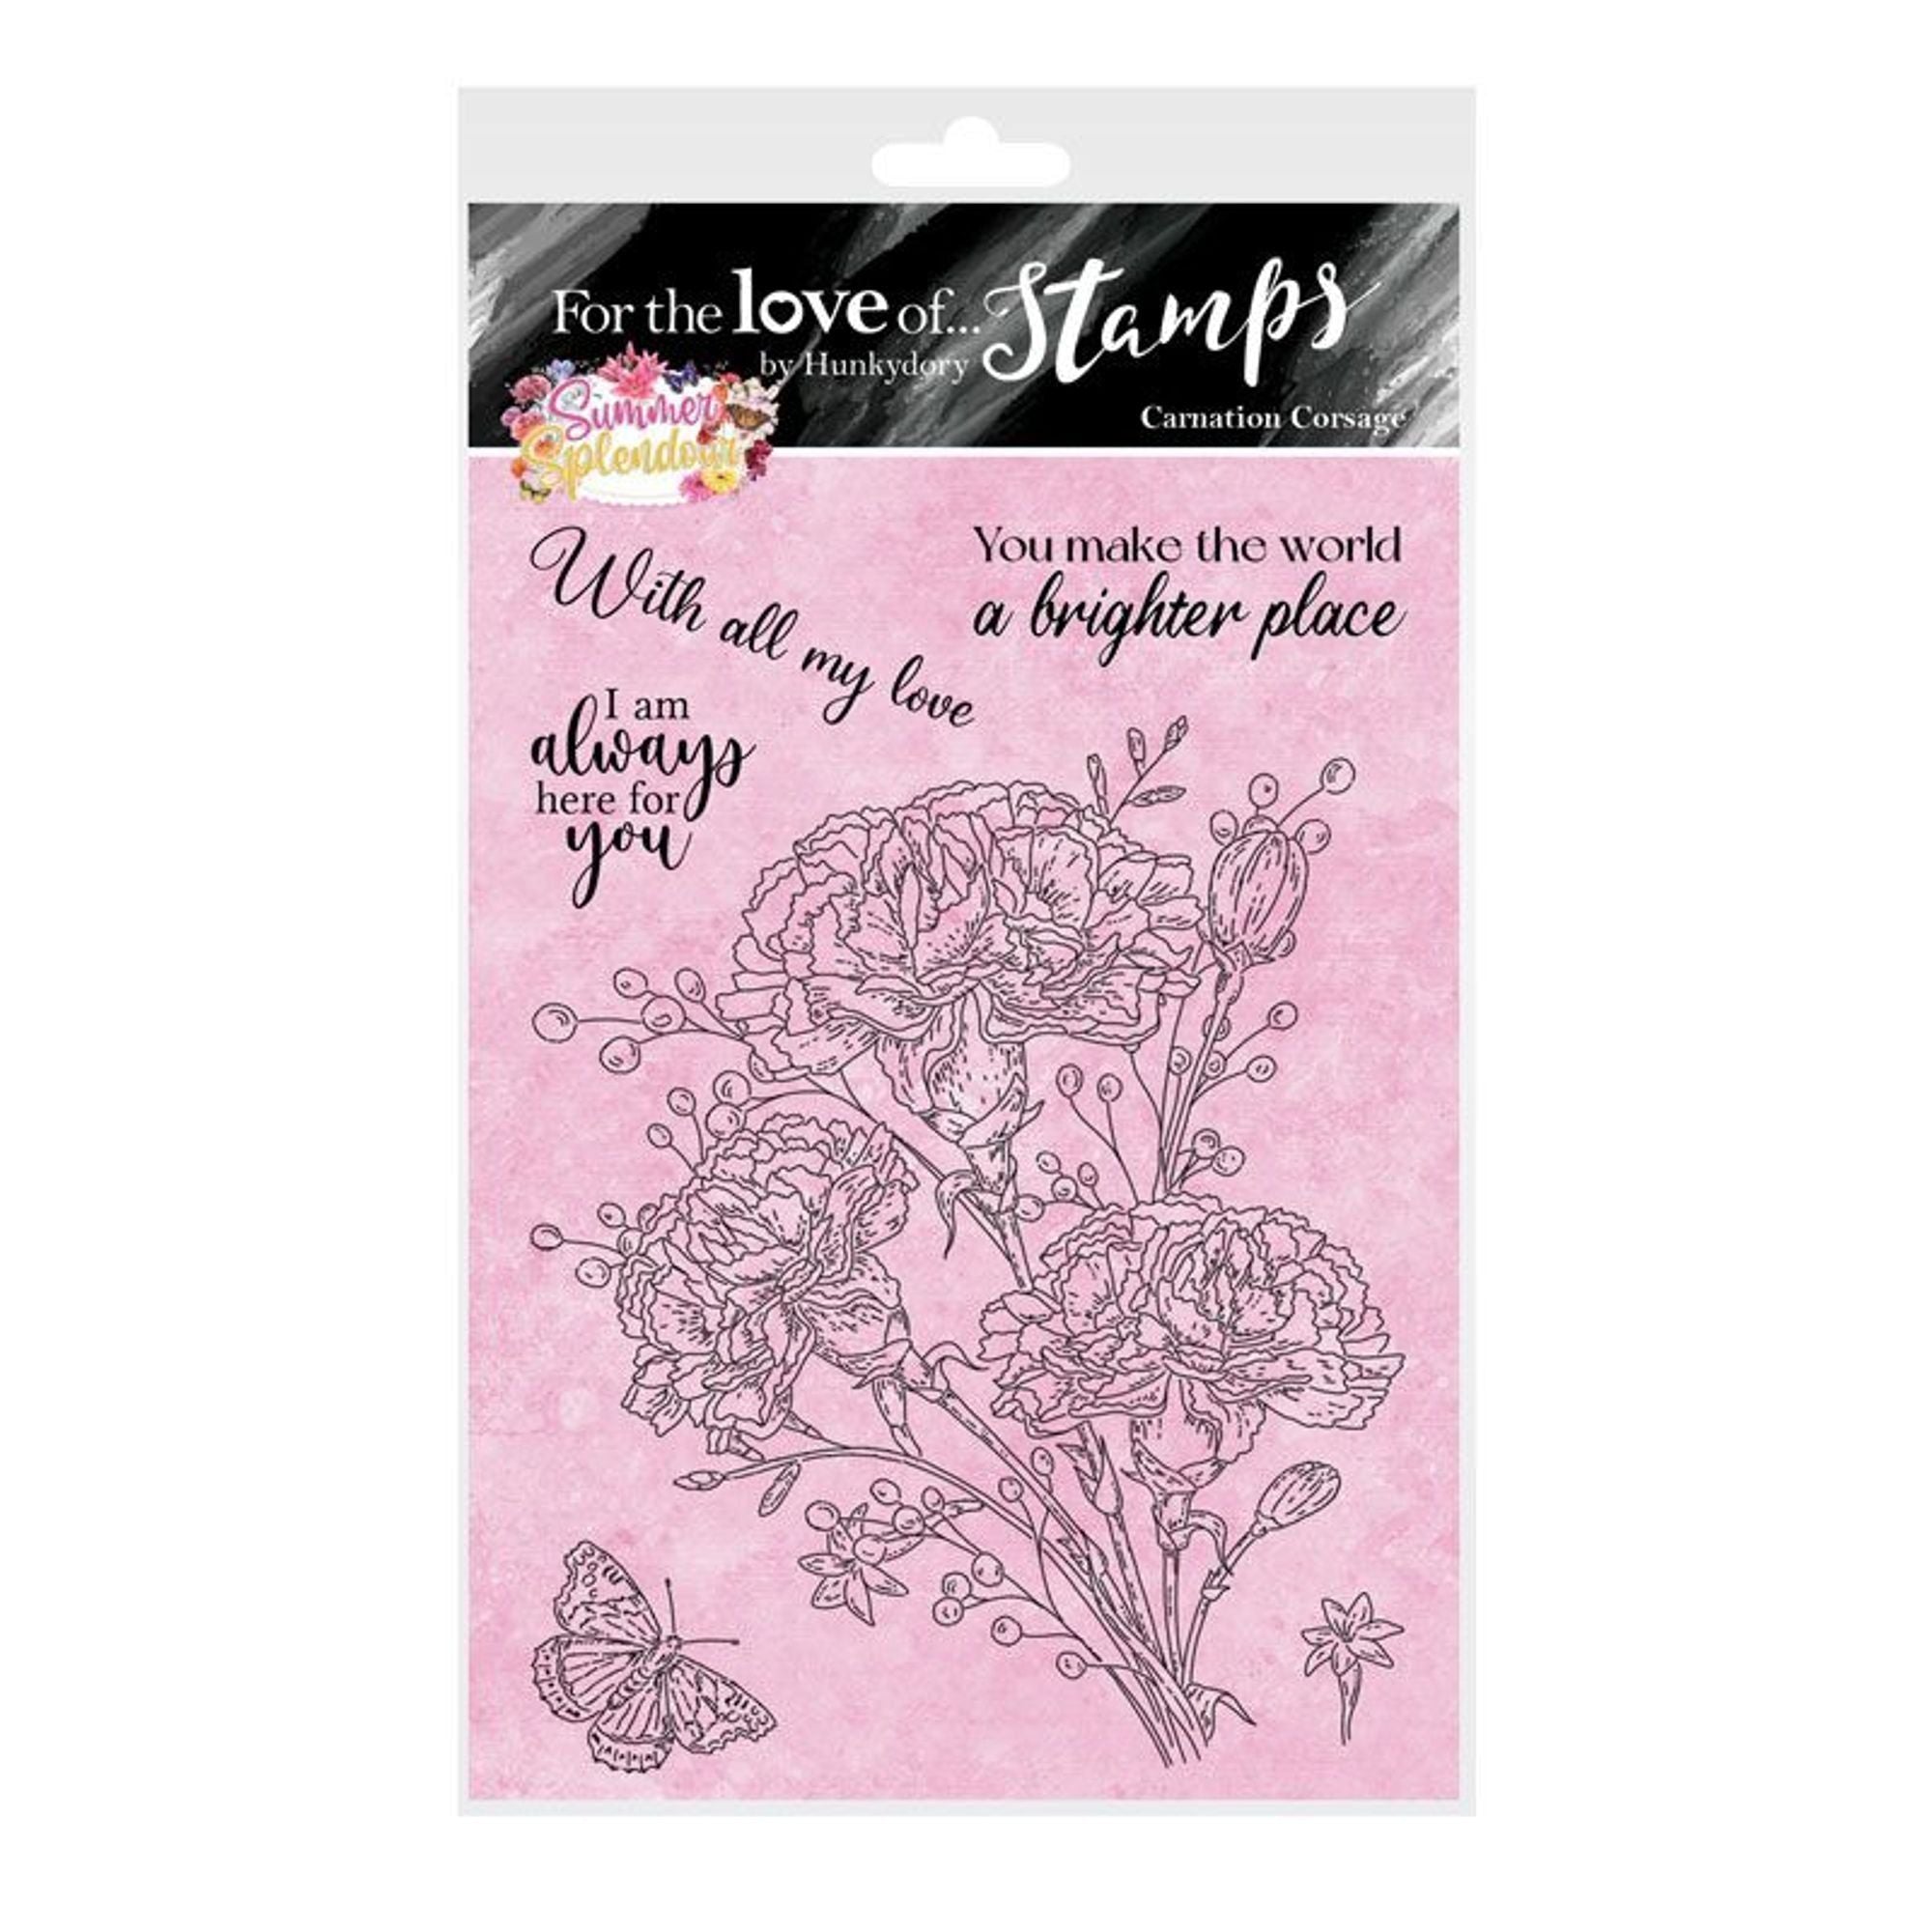 For the Love of Stamps - Carnation Corsage A6 Stamp Set